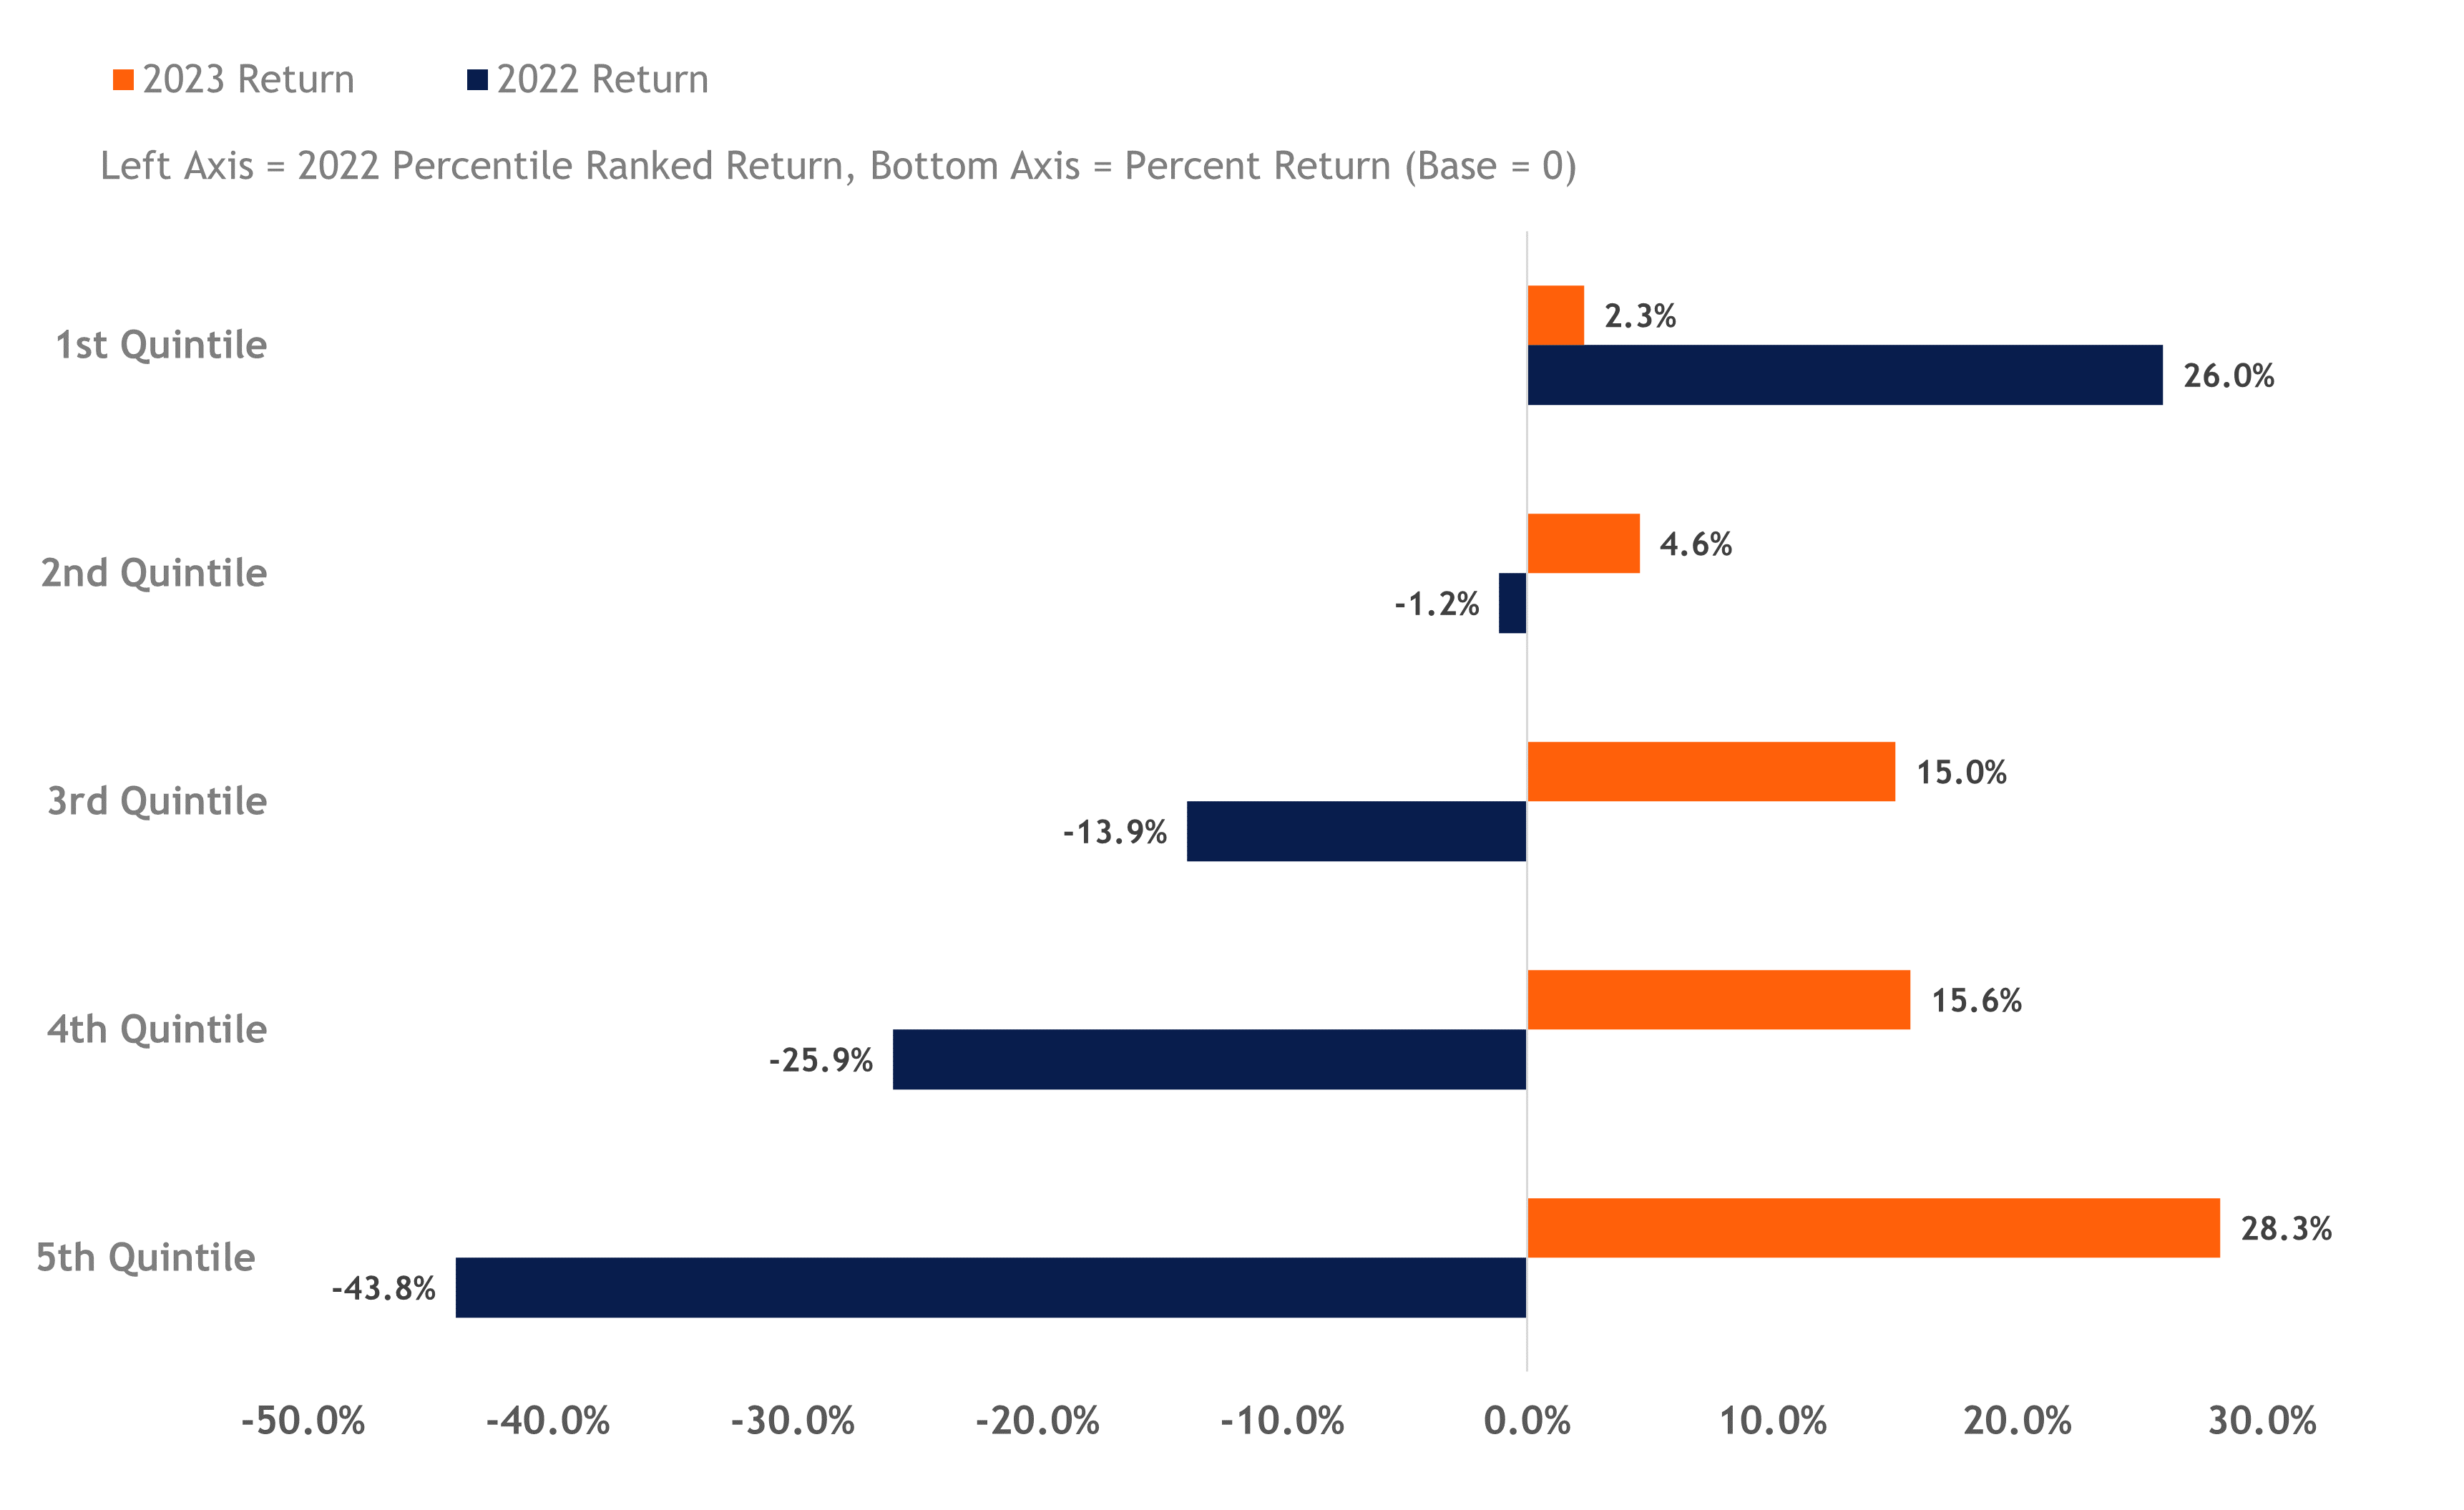 Bar graph depicting worst quintile of S&P stocks in 2022 delivered the best returns in 2023, while top 20% of stocks in 2022 gained only 2.3% last year. 